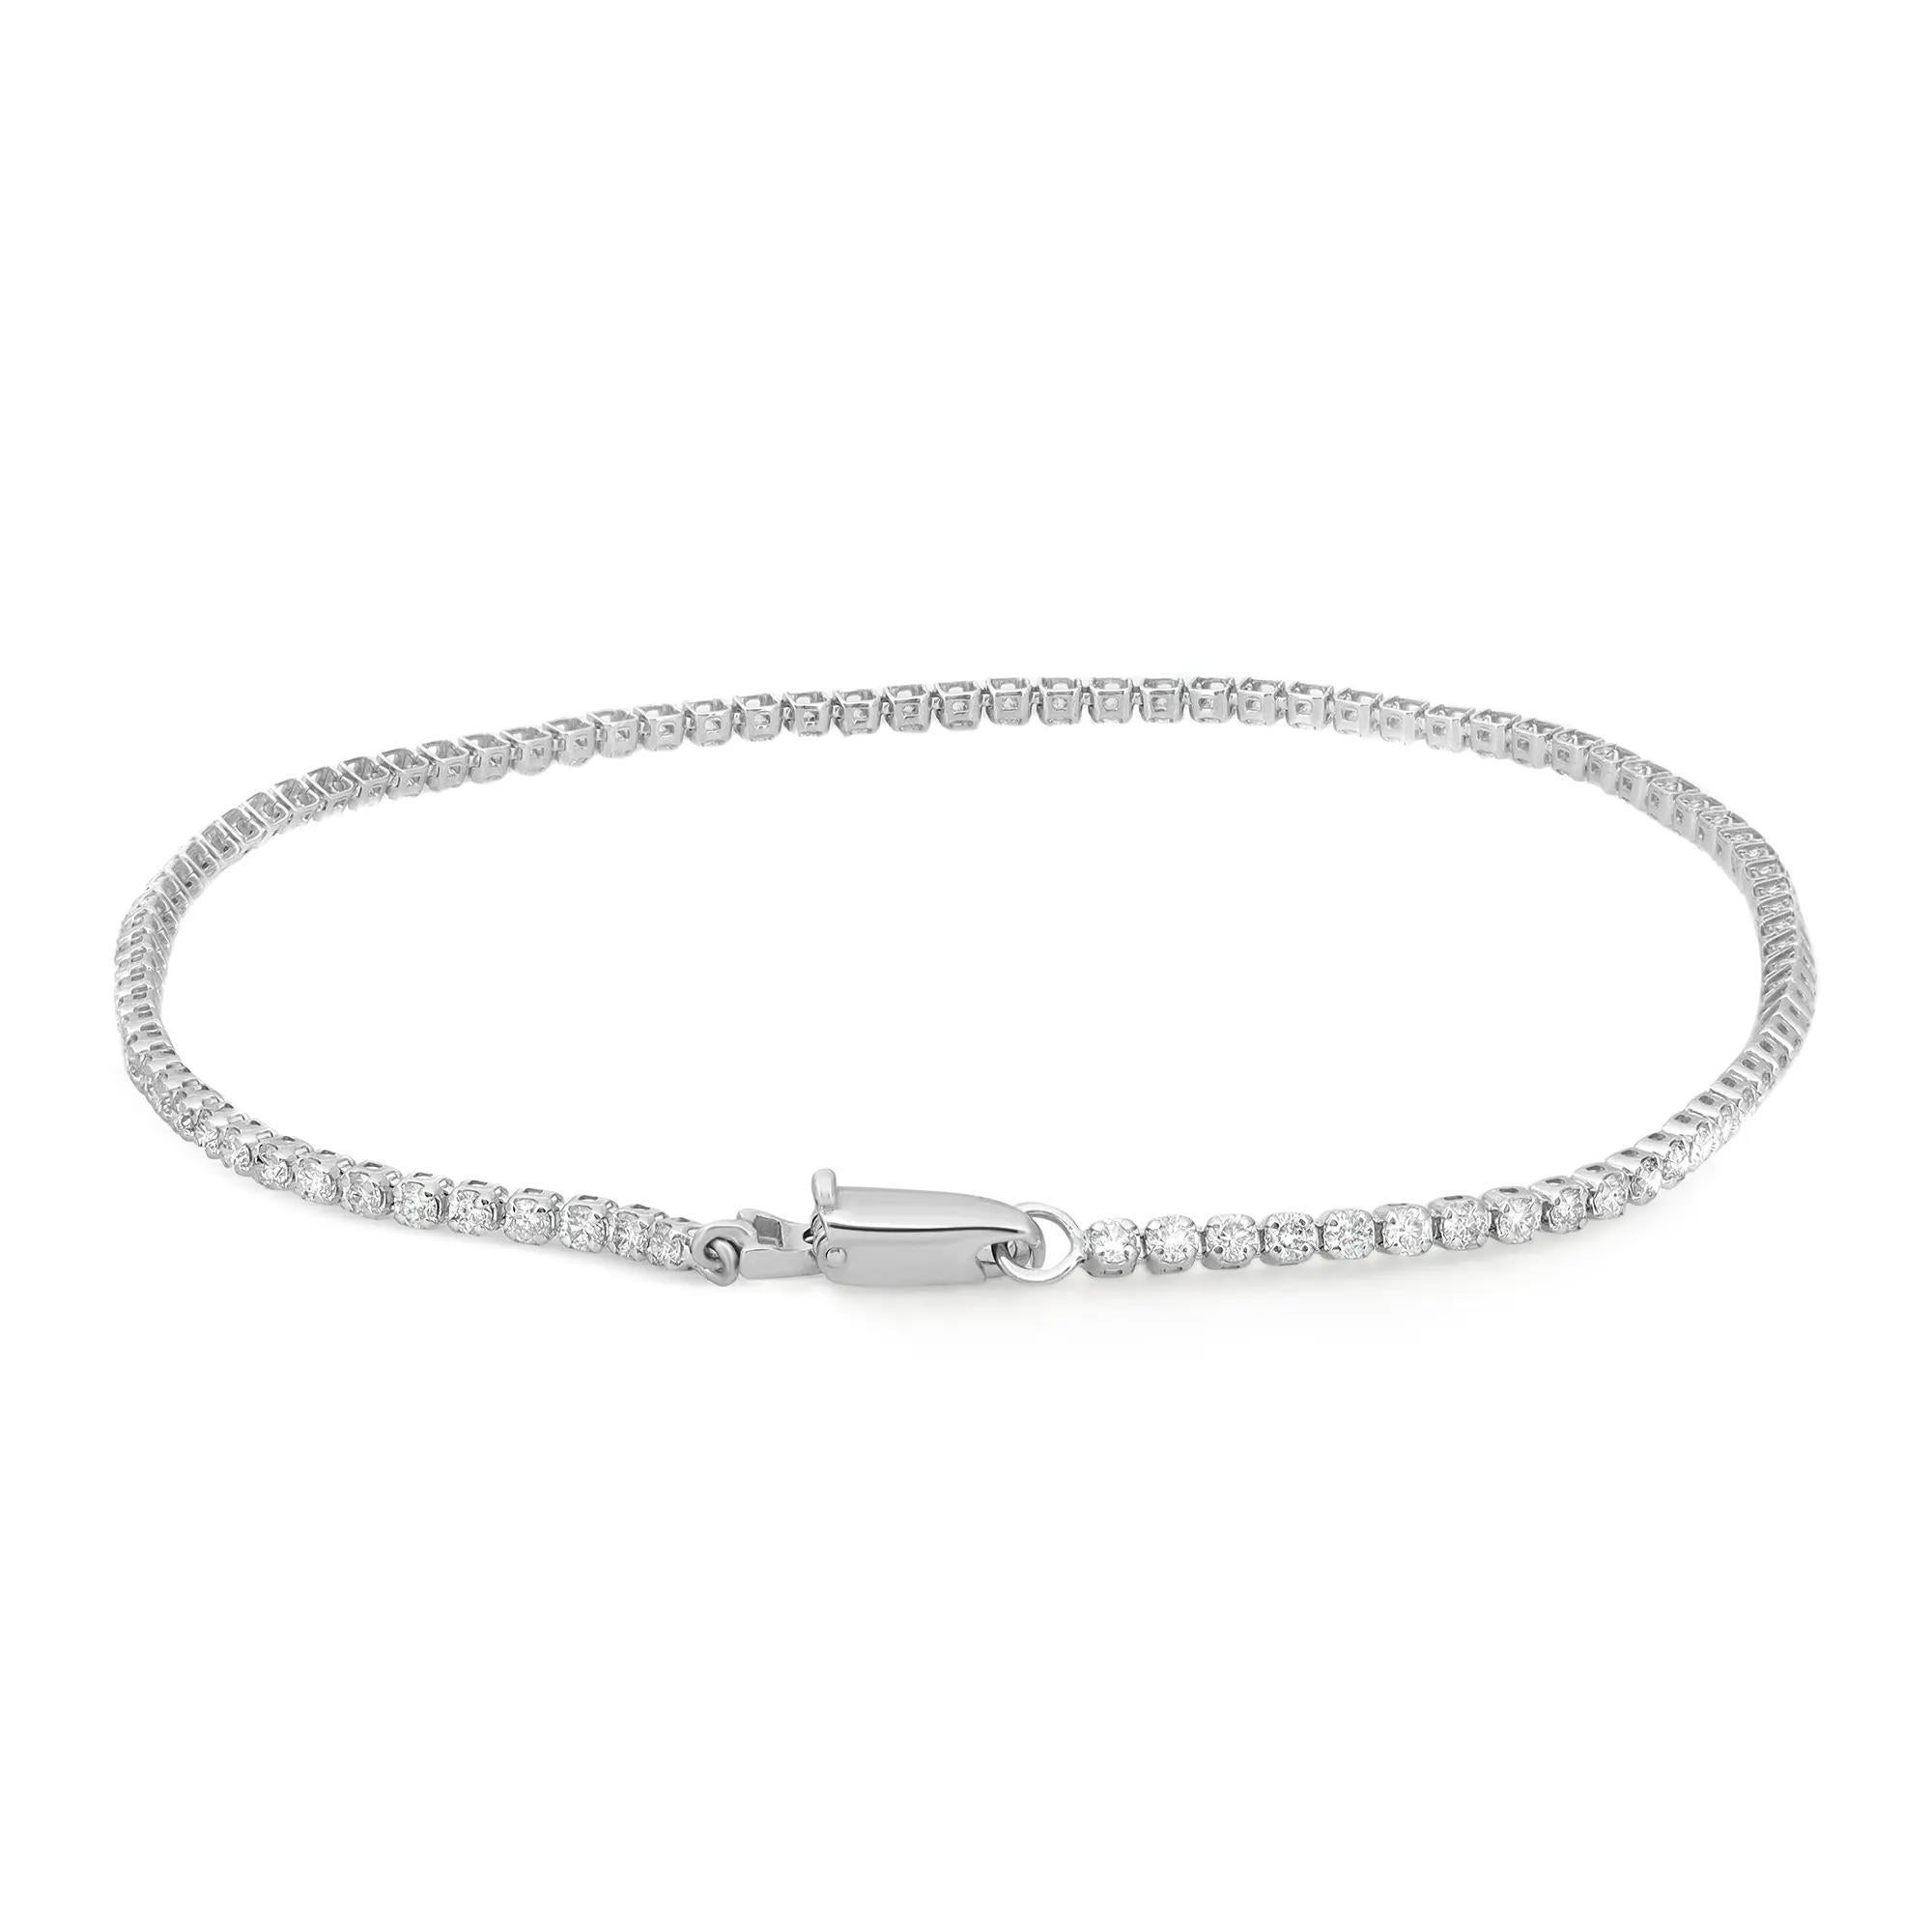 This exquisite petite Rachael Koen tennis bracelet features round brilliant cut diamonds in prong setting style crafted in 14k white gold. Feminine and super stackable handmade modern creation is a great addition to your jewelry collection. Total